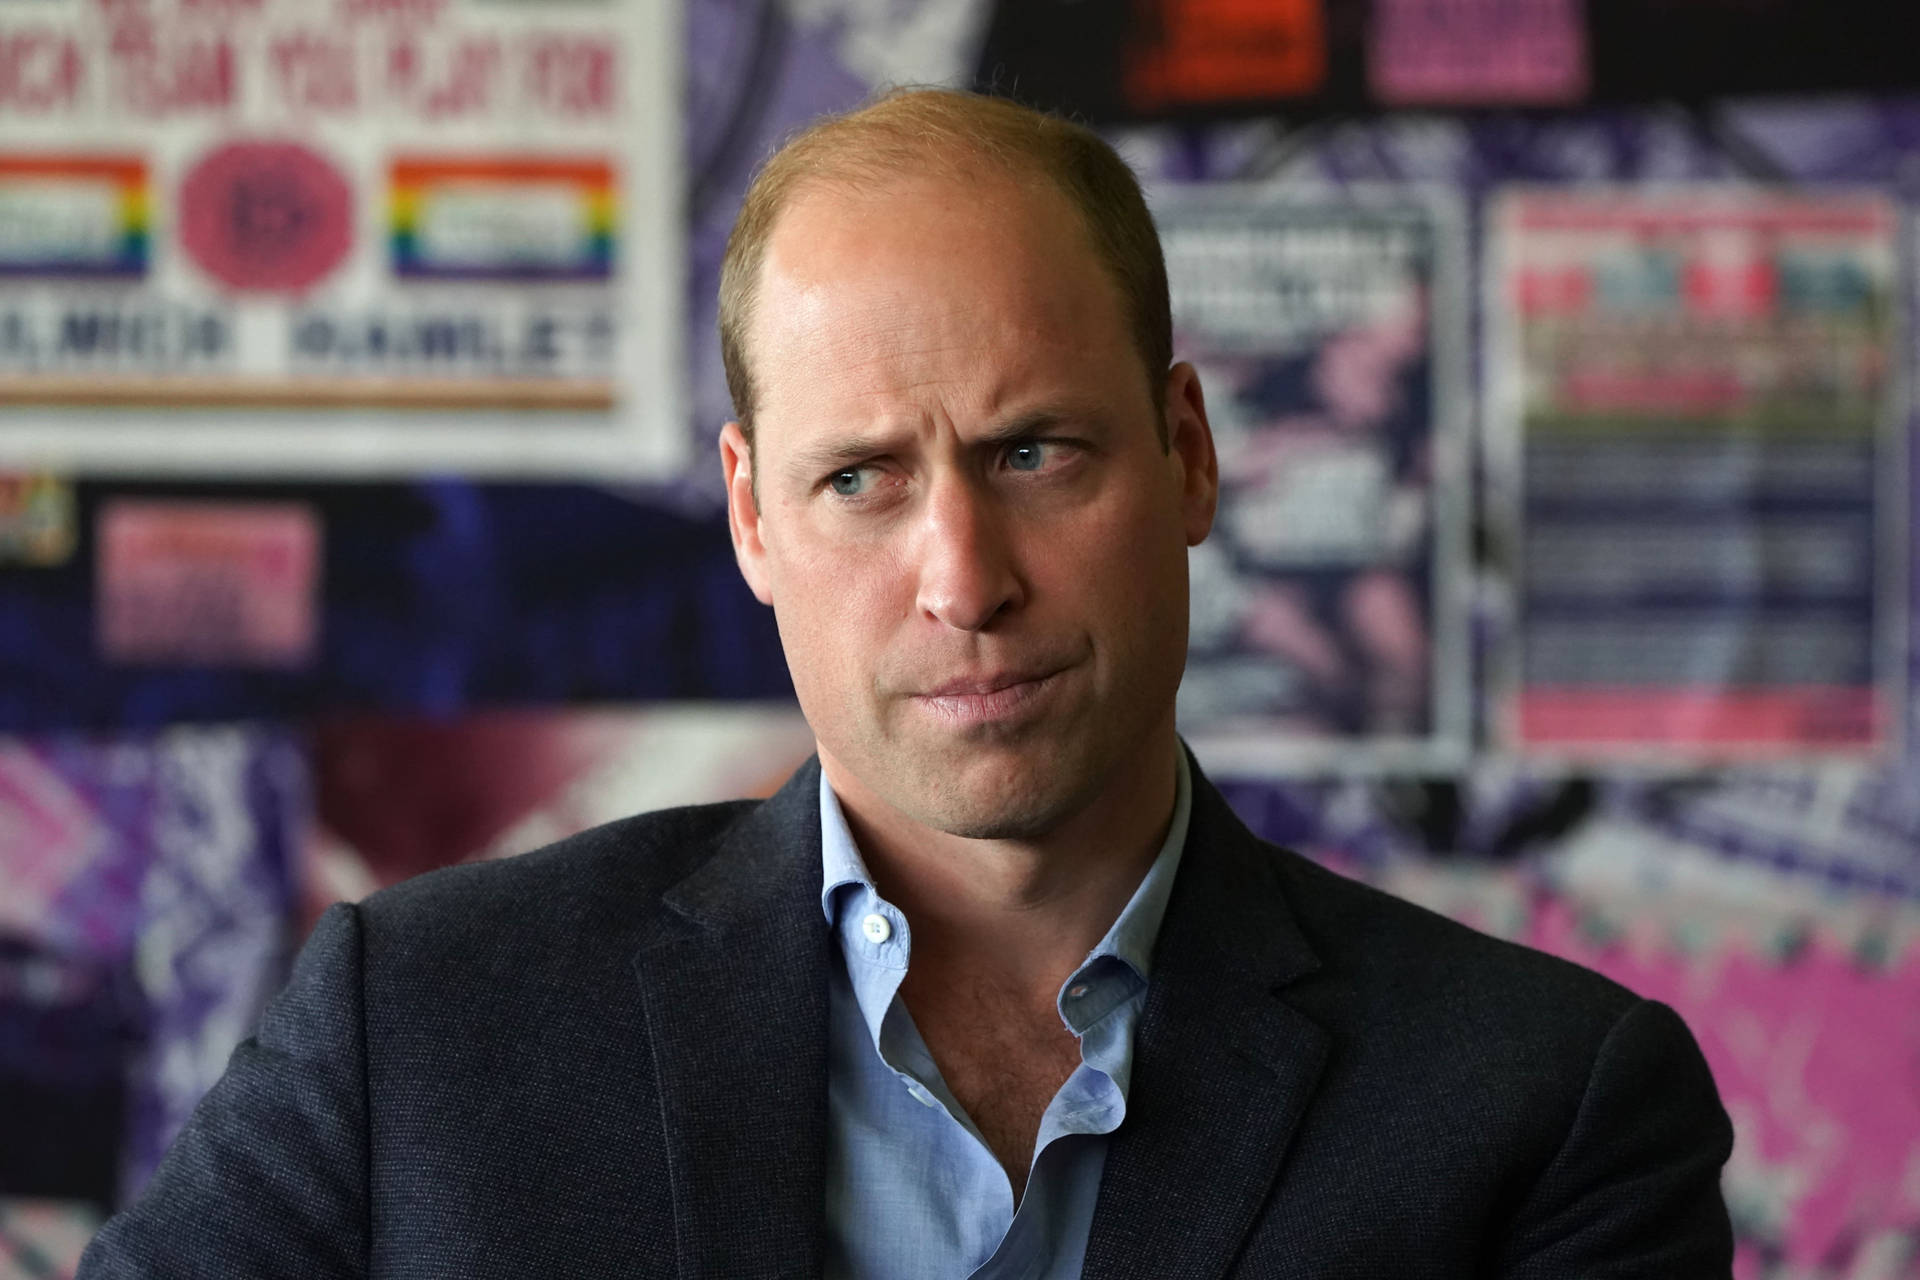 Prince William With Raised Brows